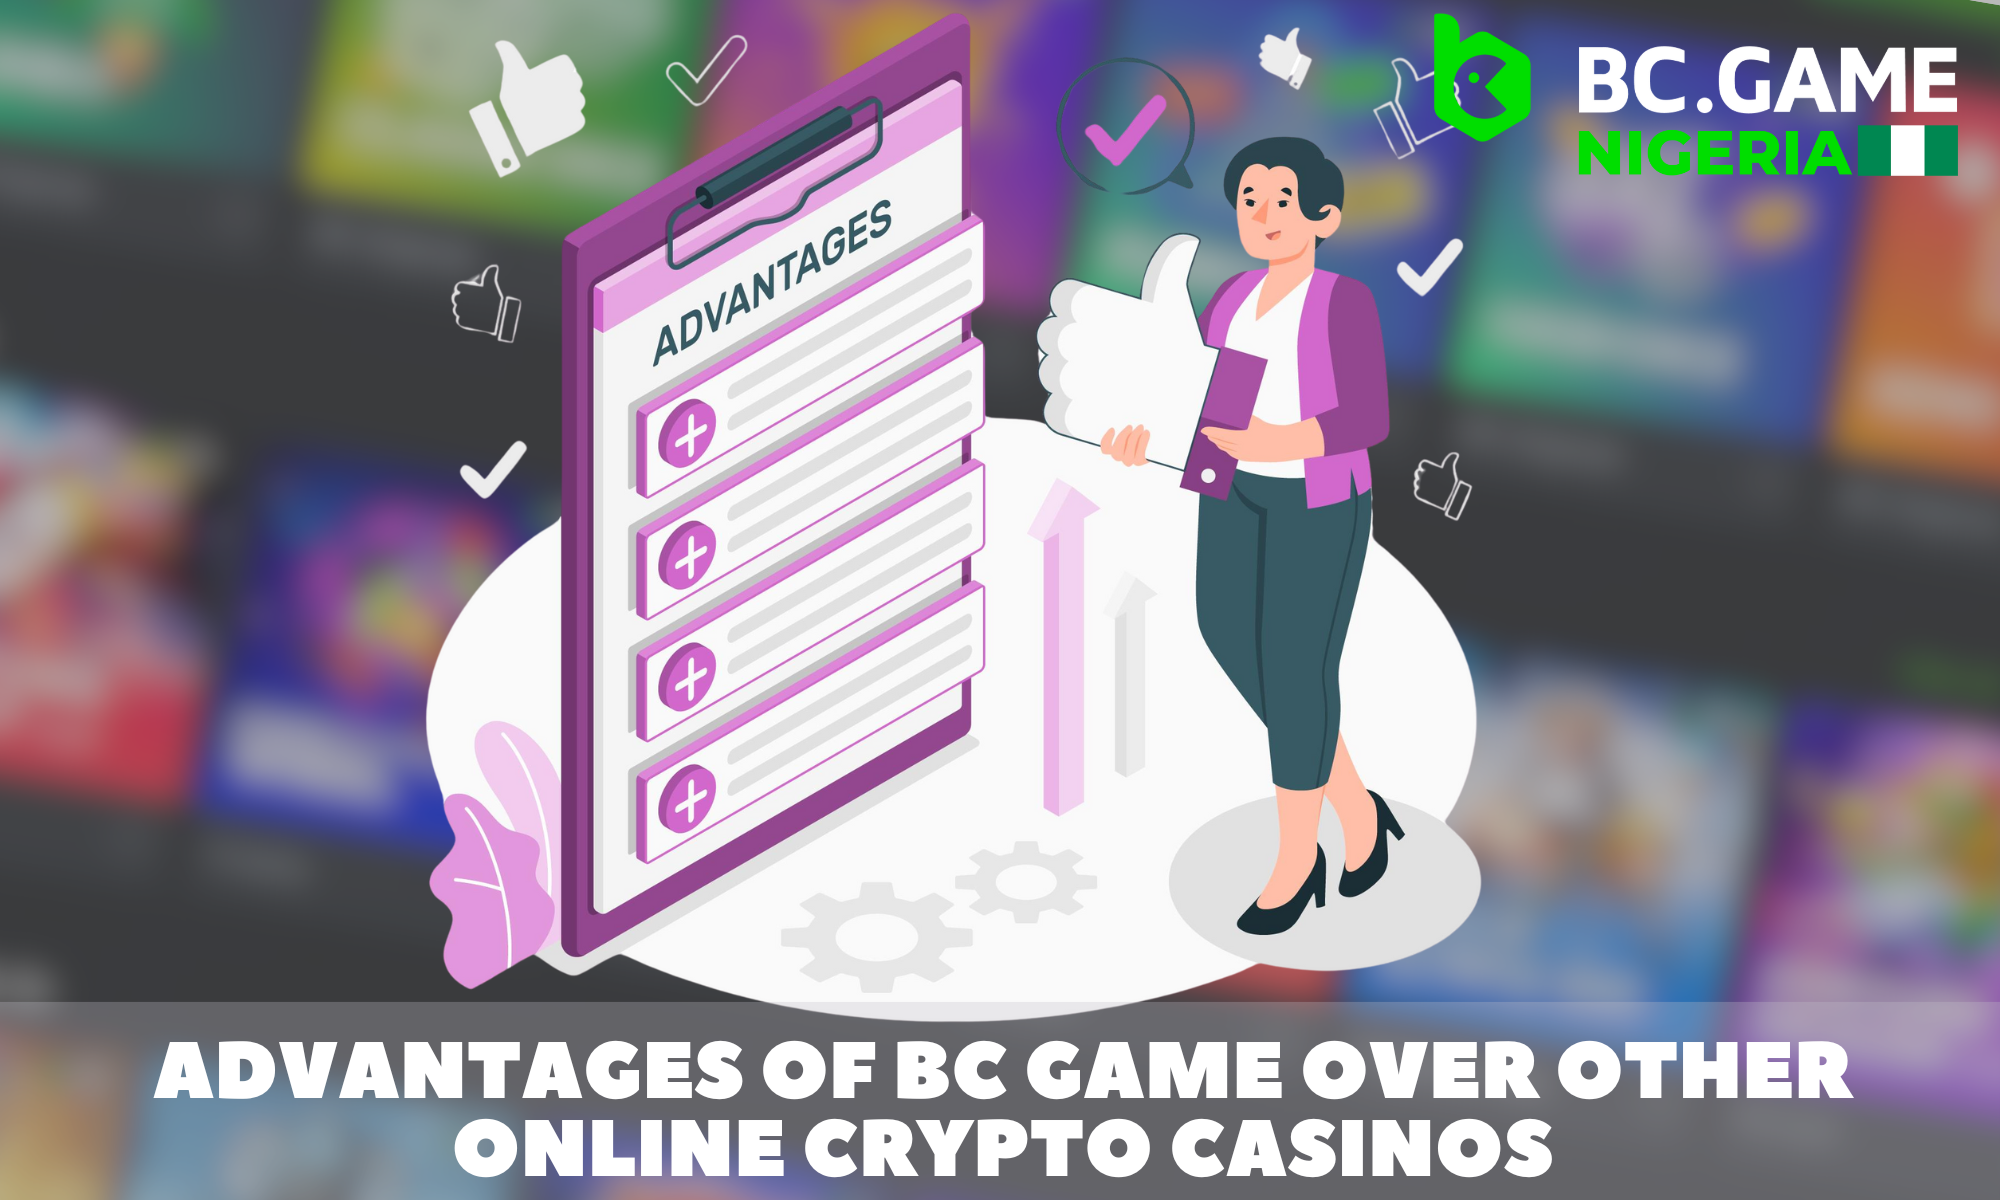 List of the main advantages of BC Game over other casinos